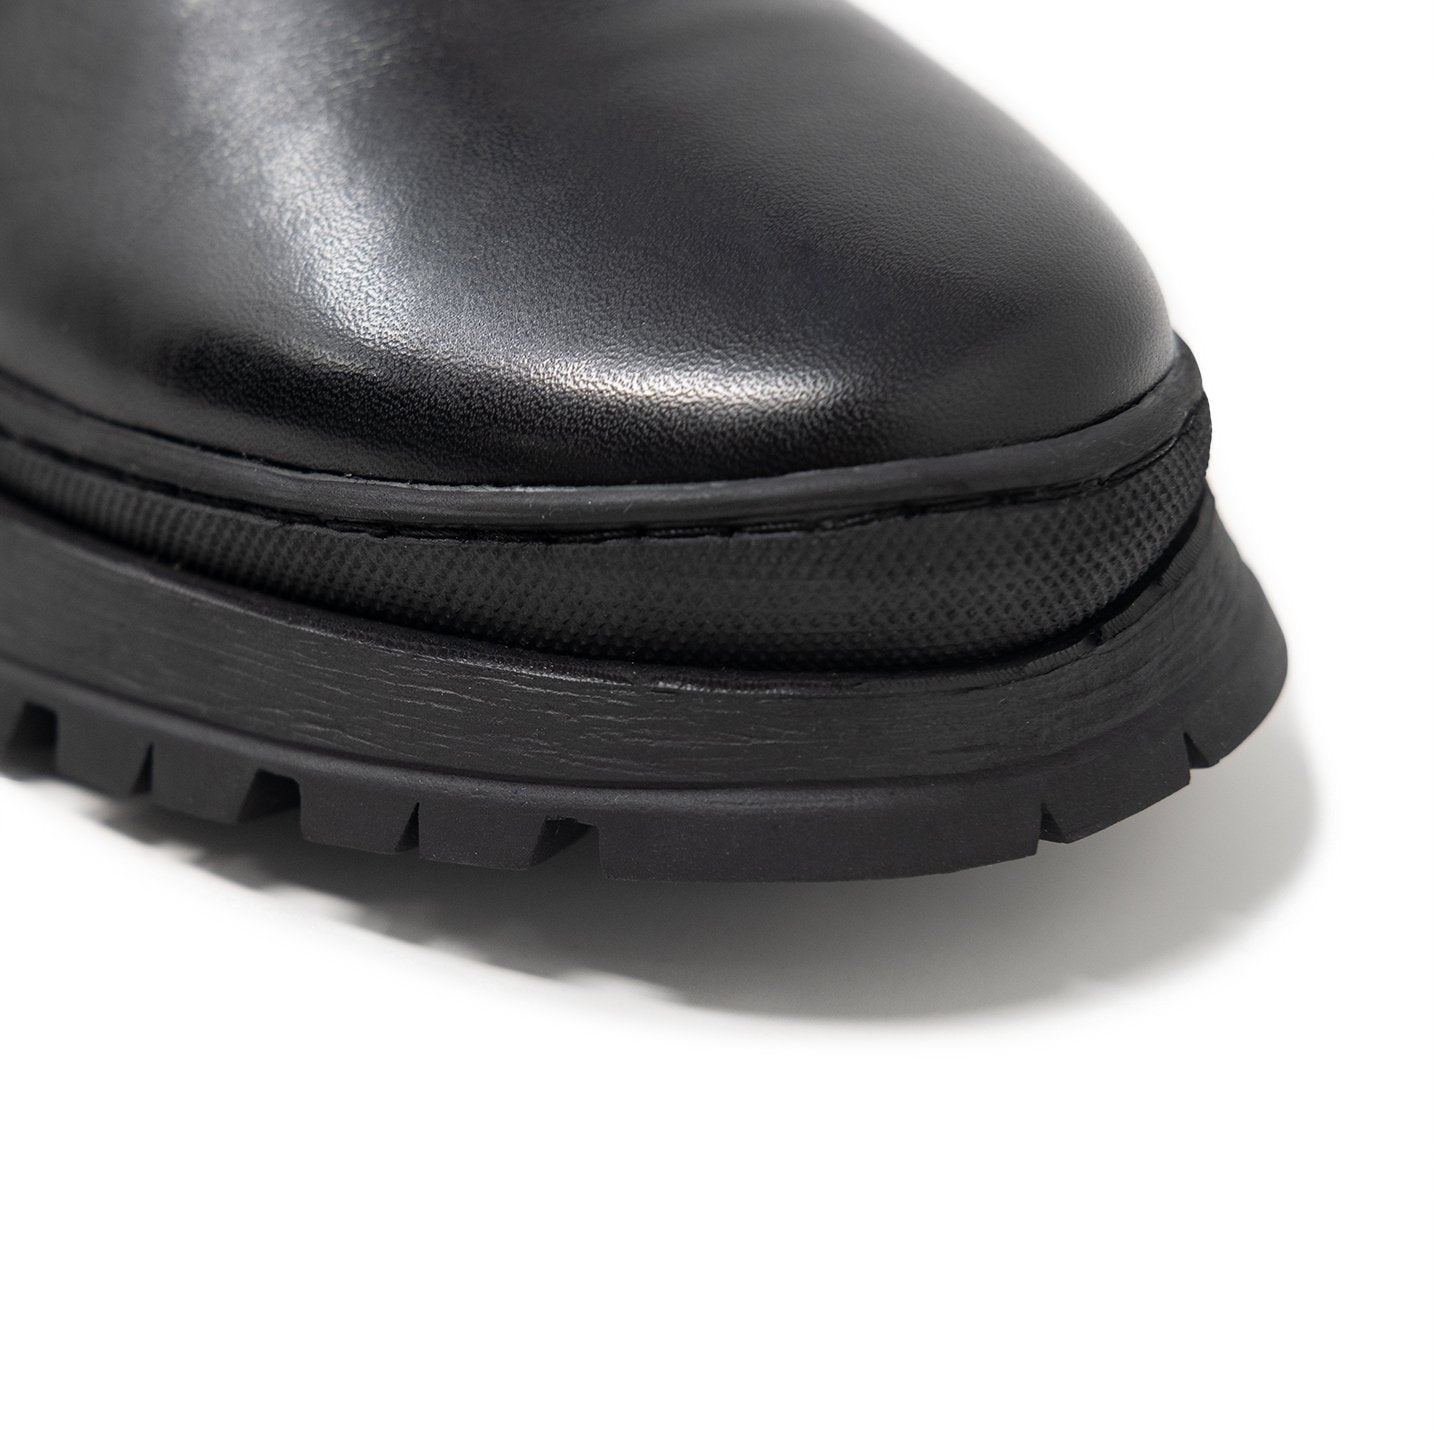 Boot Rubber Toe Guard on a Boot